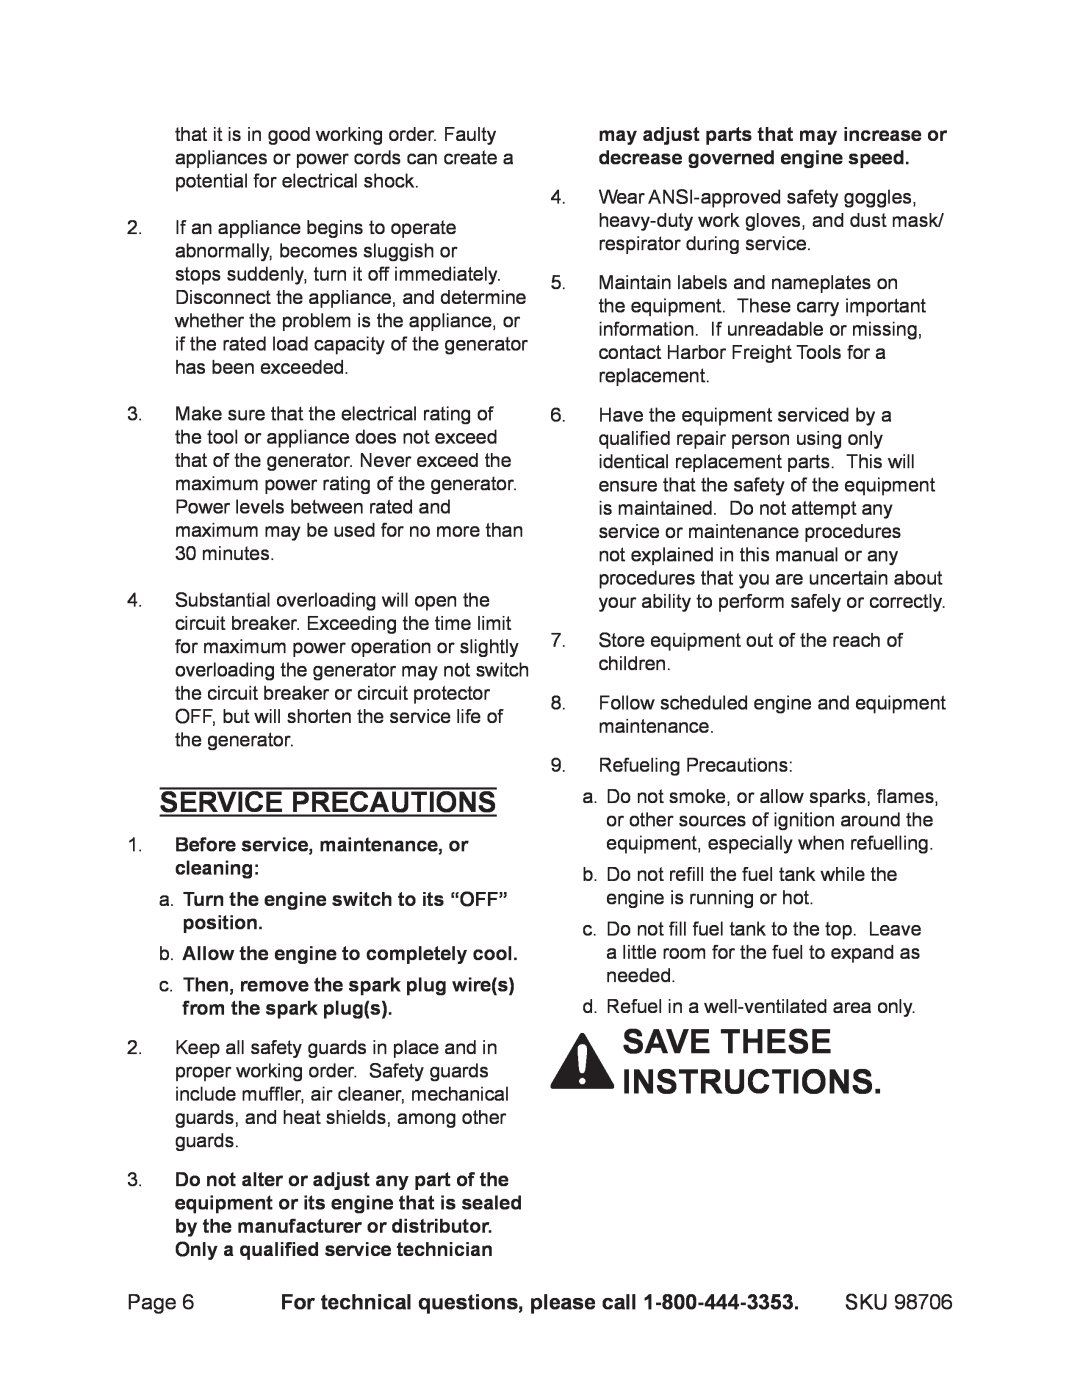 Chicago Electric 98706 manual Save these instructions, Service precautions, For technical questions, please call 